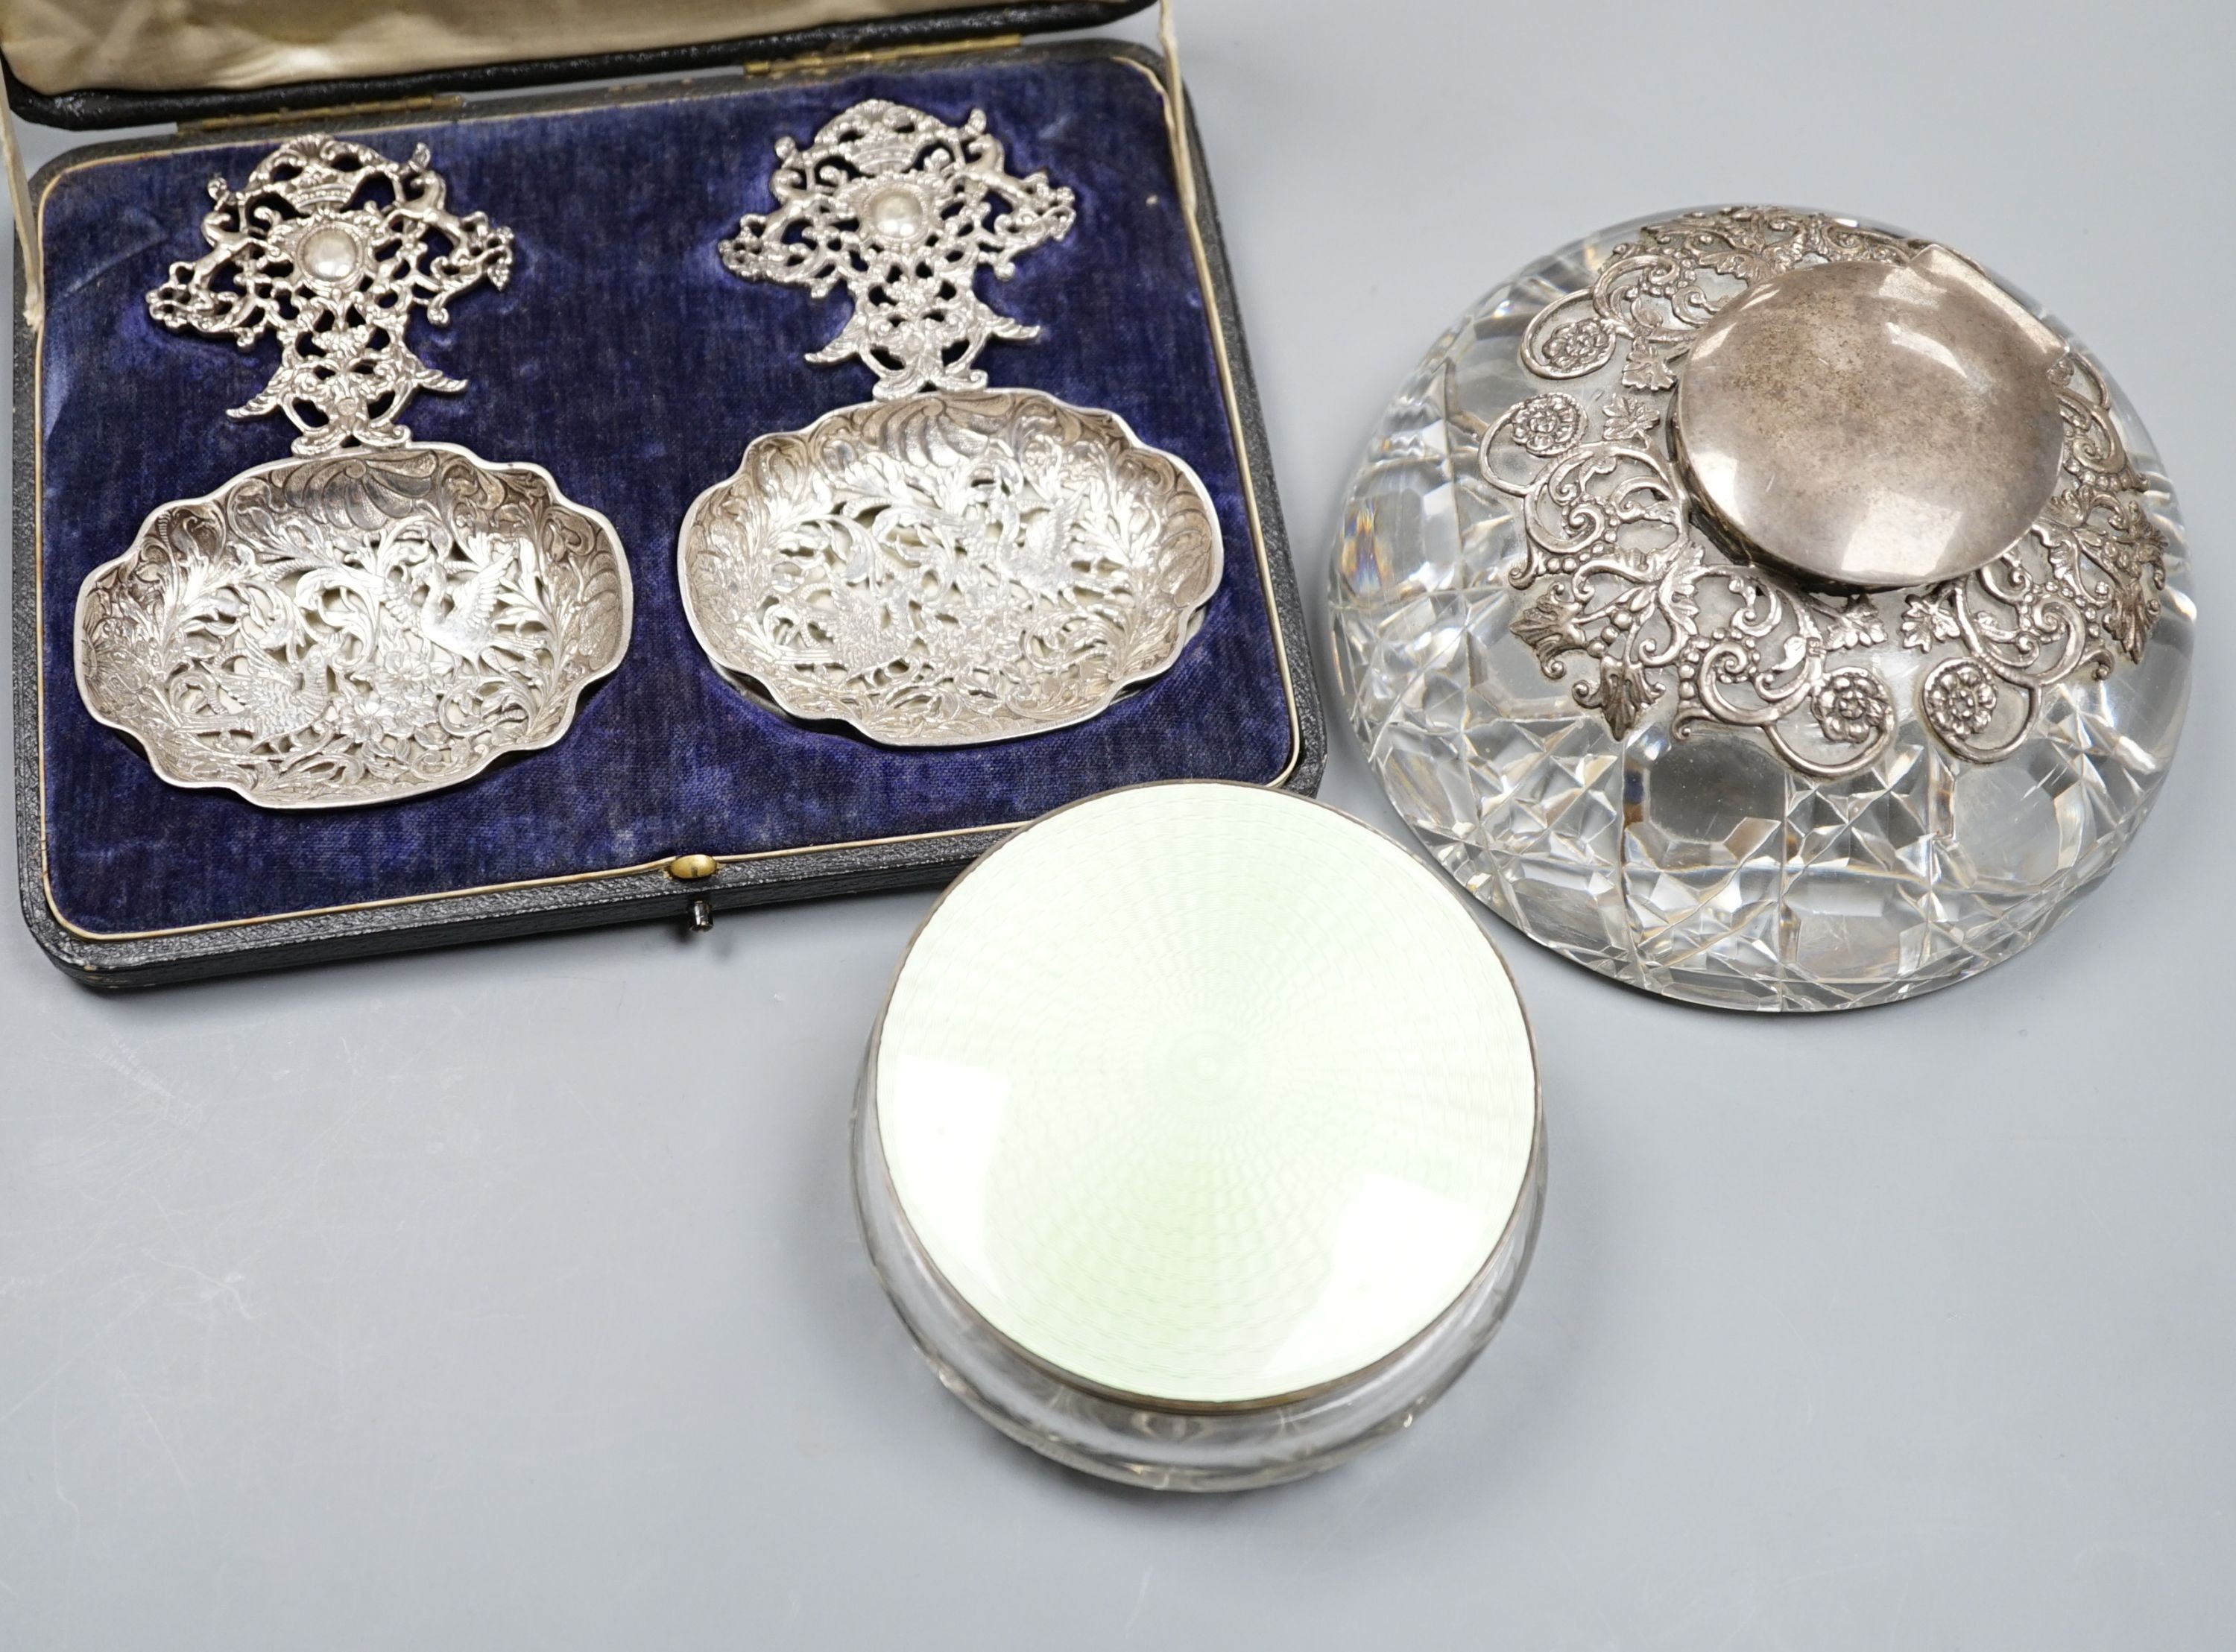 An Edwardian pierced silver mounted glass inkwell, London, 1901, 13.2cm, a silver and green guilloche enamel mounted glass powder jar and a cased pair of early 20th century ornate pierced silver spoons.